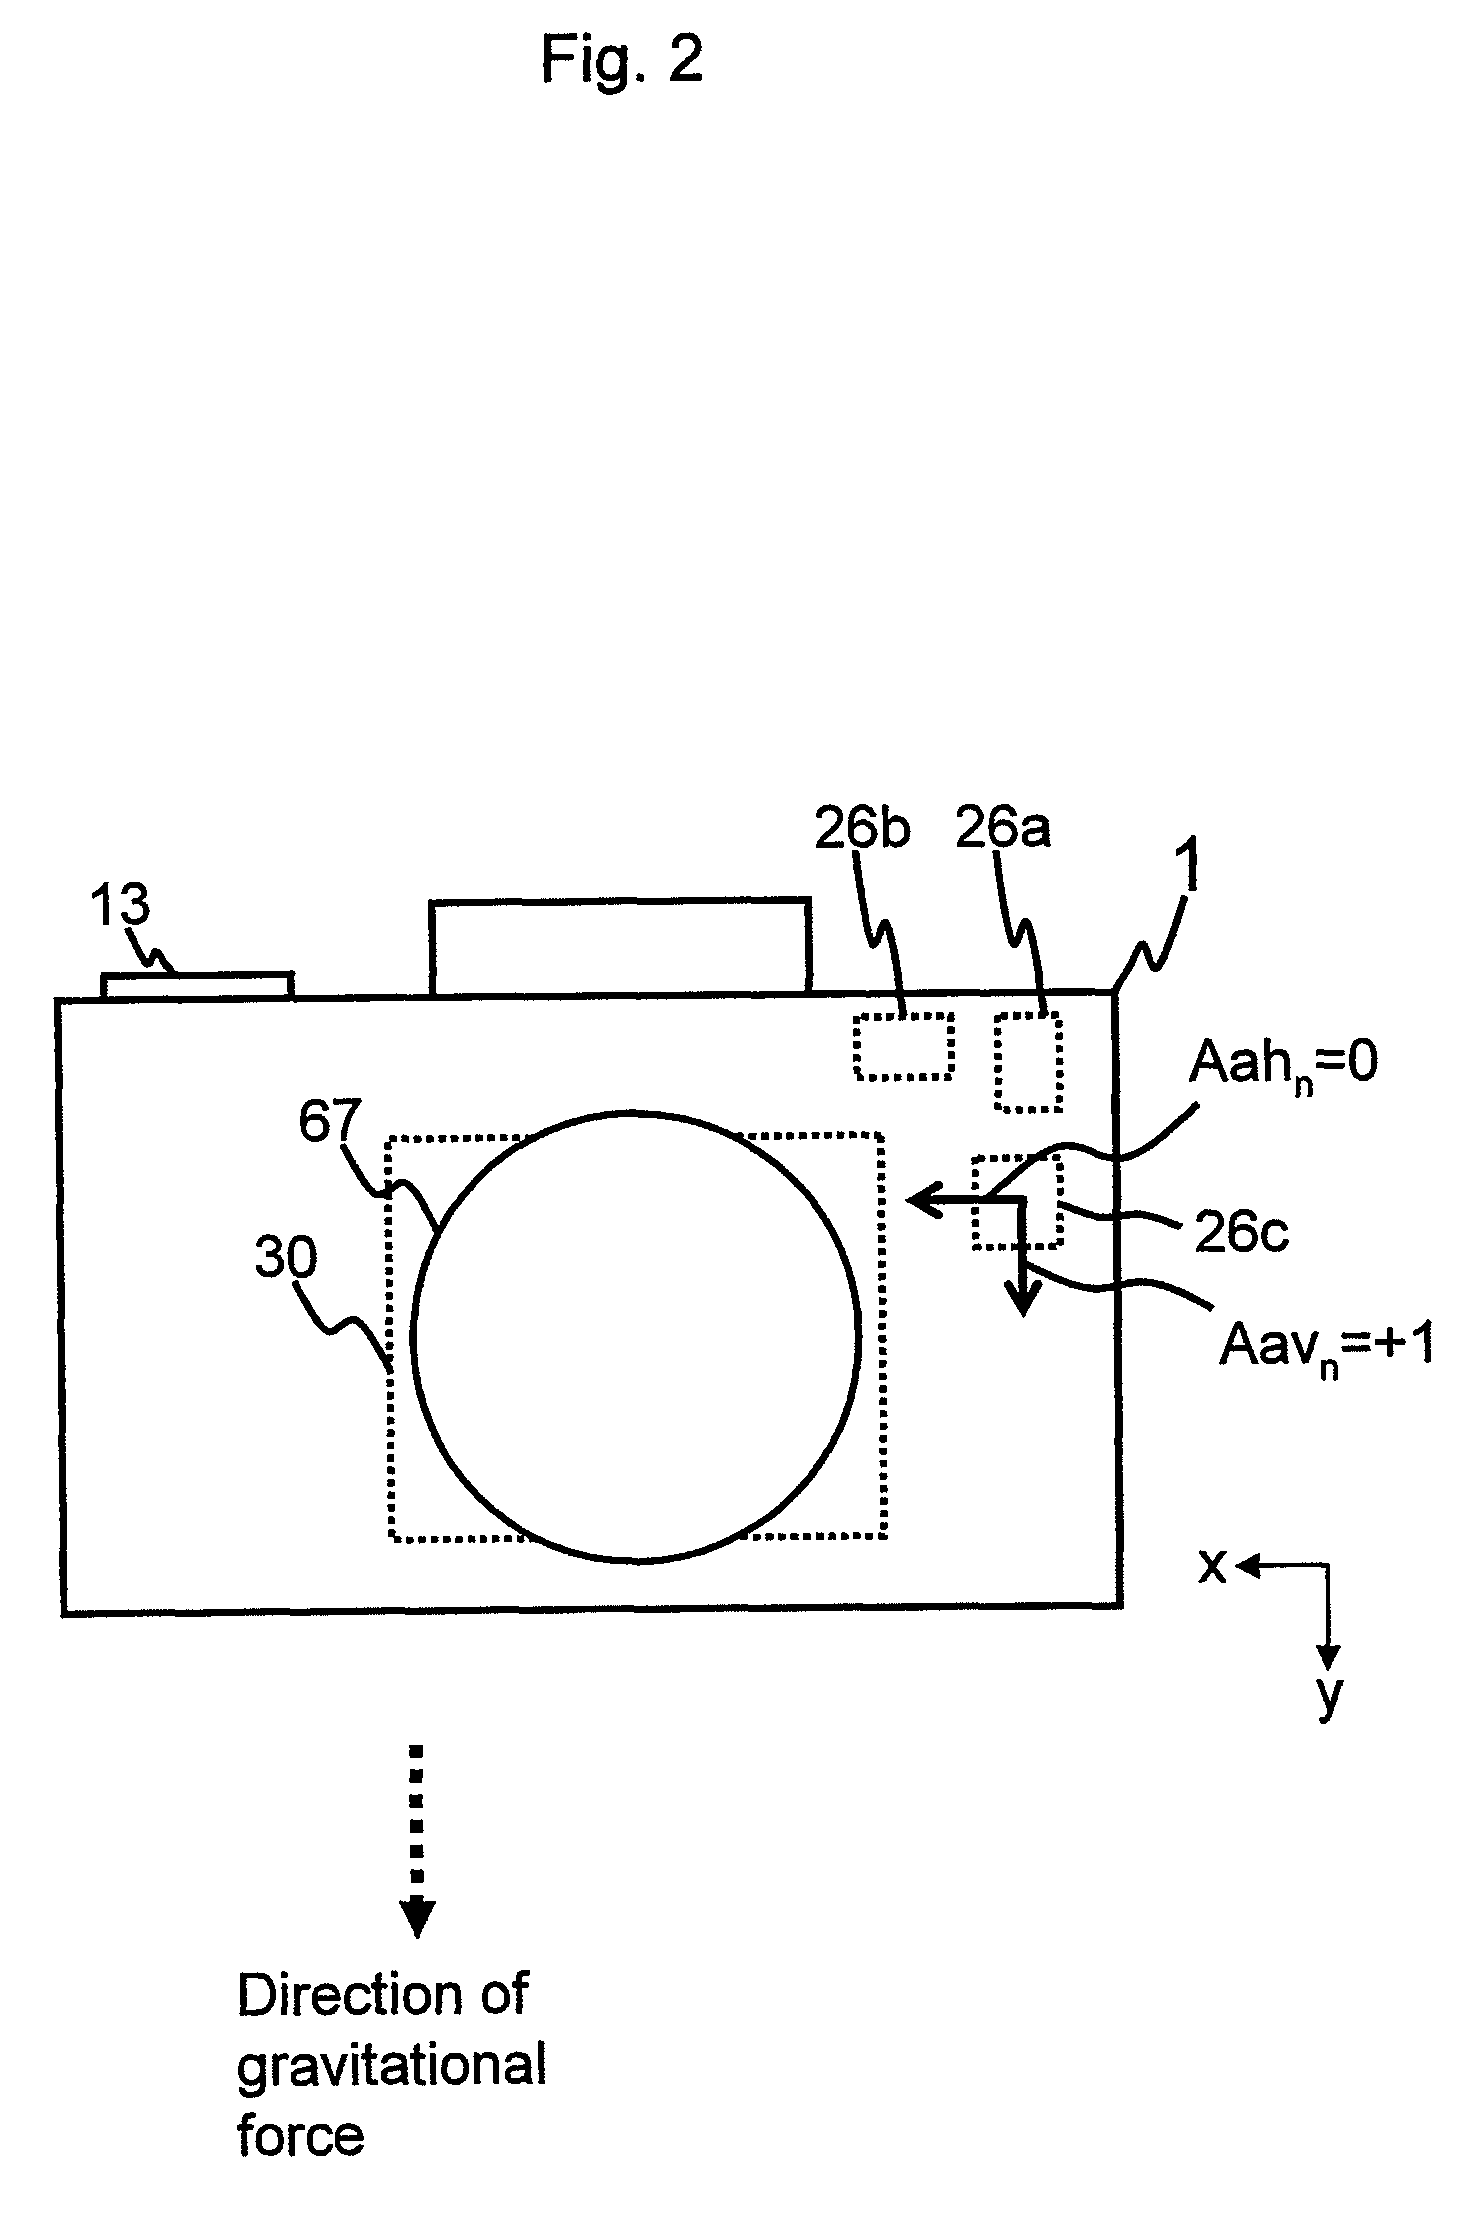 Photographic apparatus having inclination correction and determining whether inclination correction is to be performed